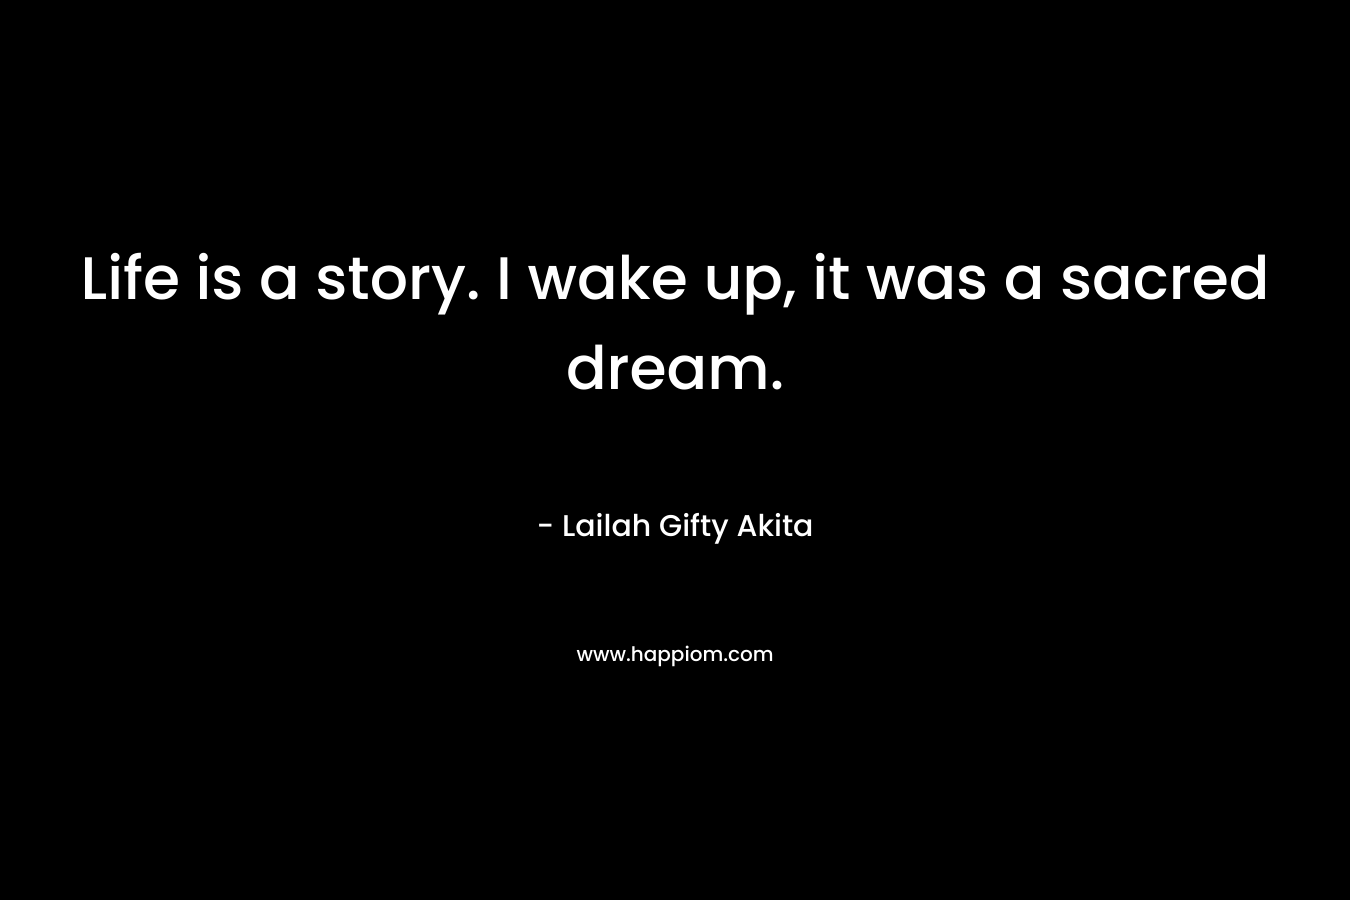 Life is a story. I wake up, it was a sacred dream.